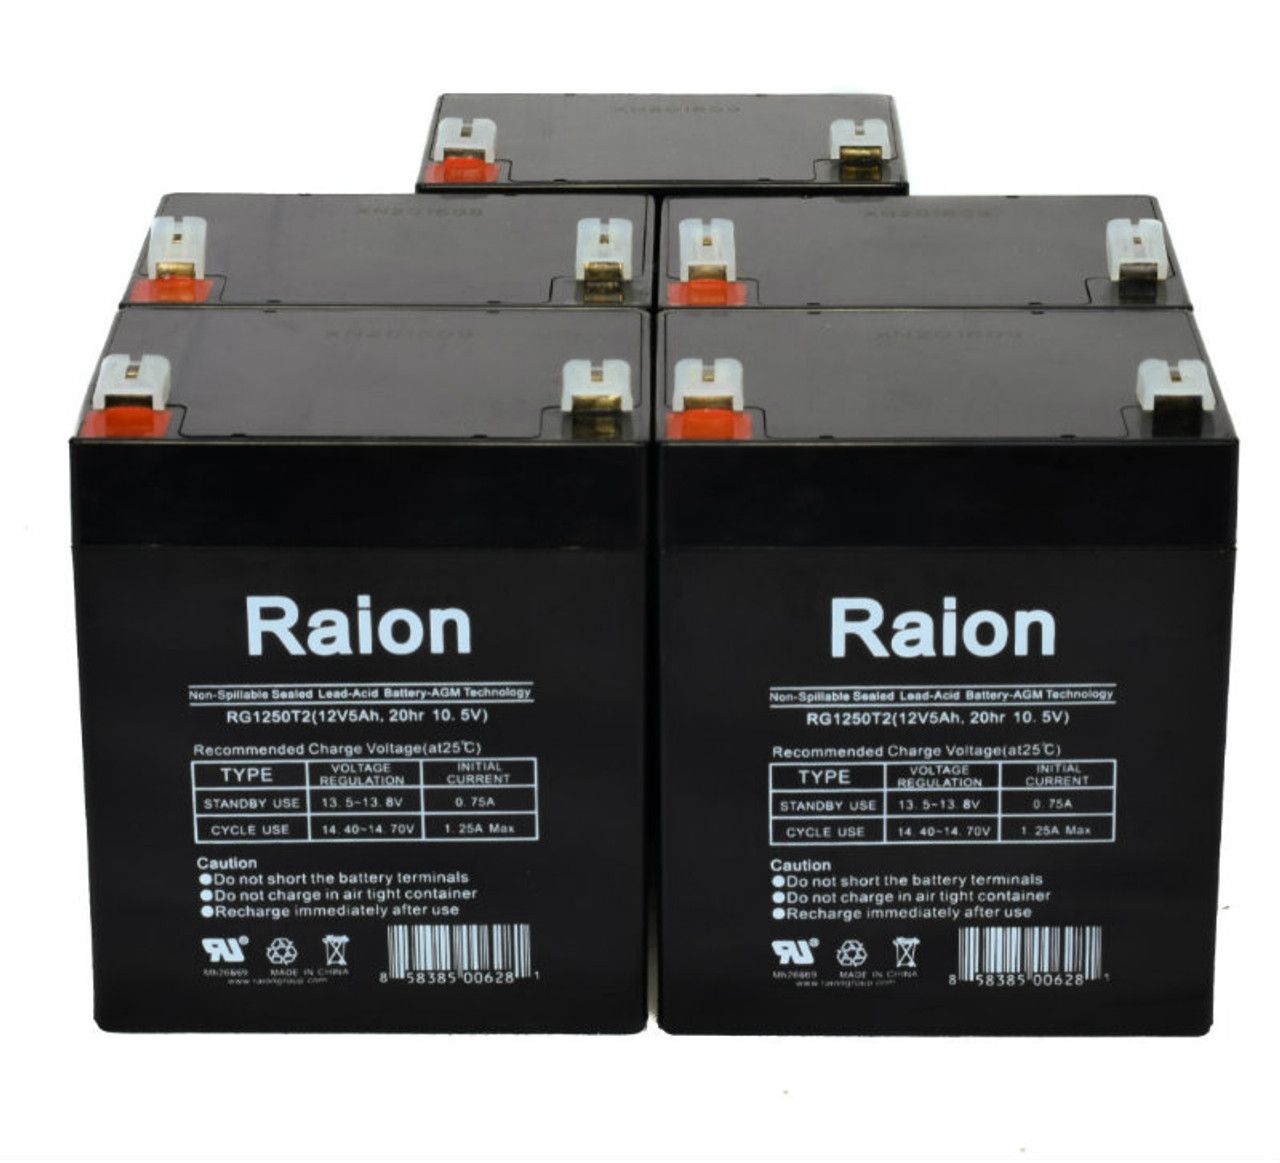 Raion Power RG1250T1 Replacement Fire Alarm Control Panel Battery for ACME Security System AL6/12 - 8 Pack